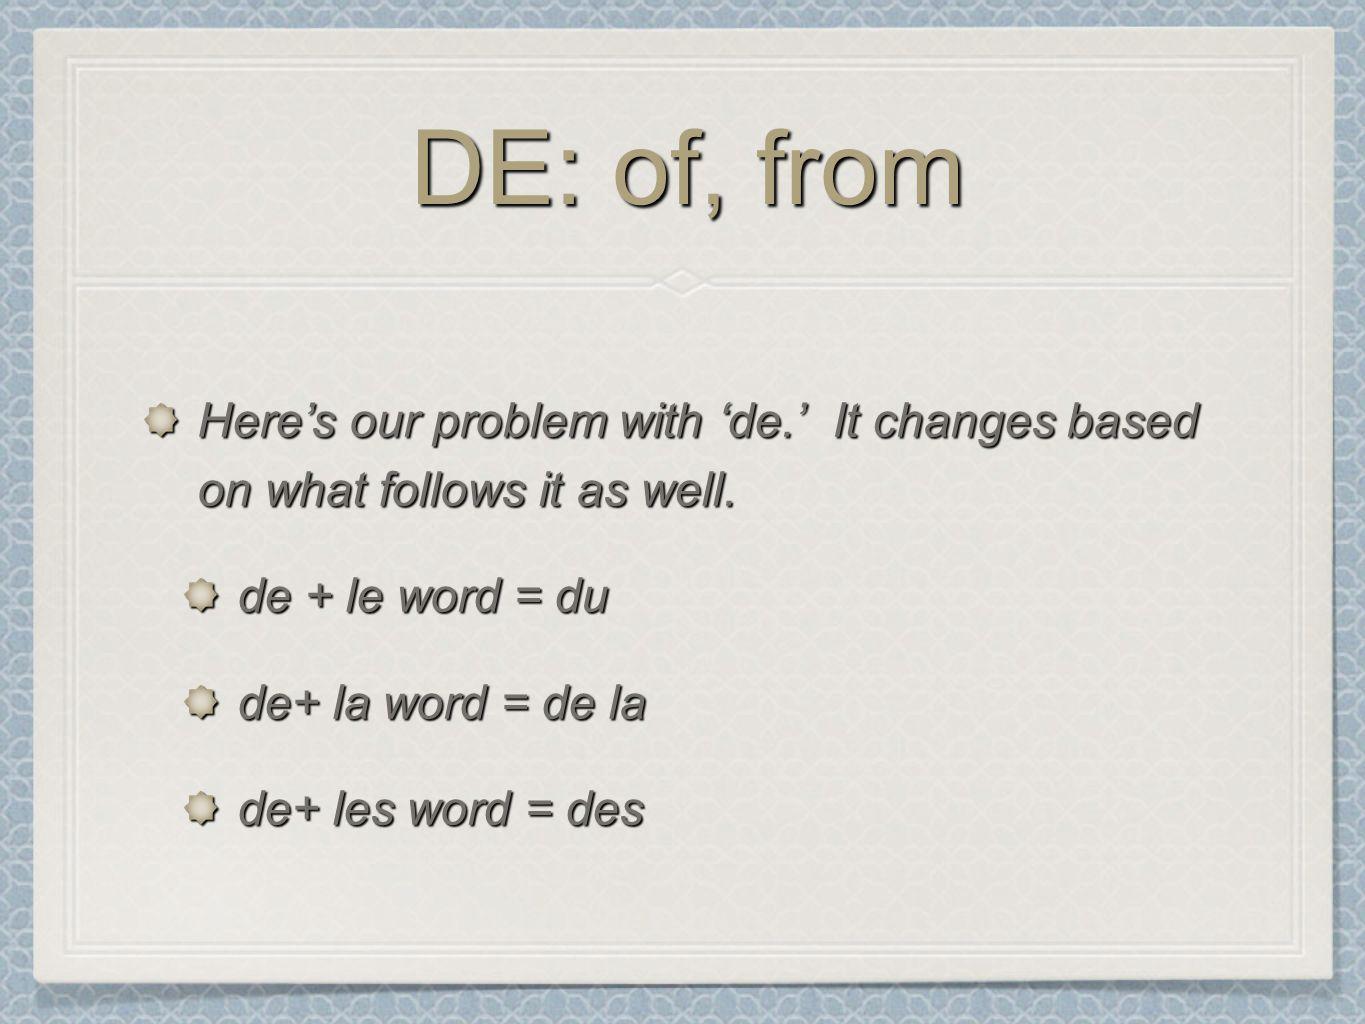 DE: of, from Heres our problem with de. It changes based on what follows it as well.